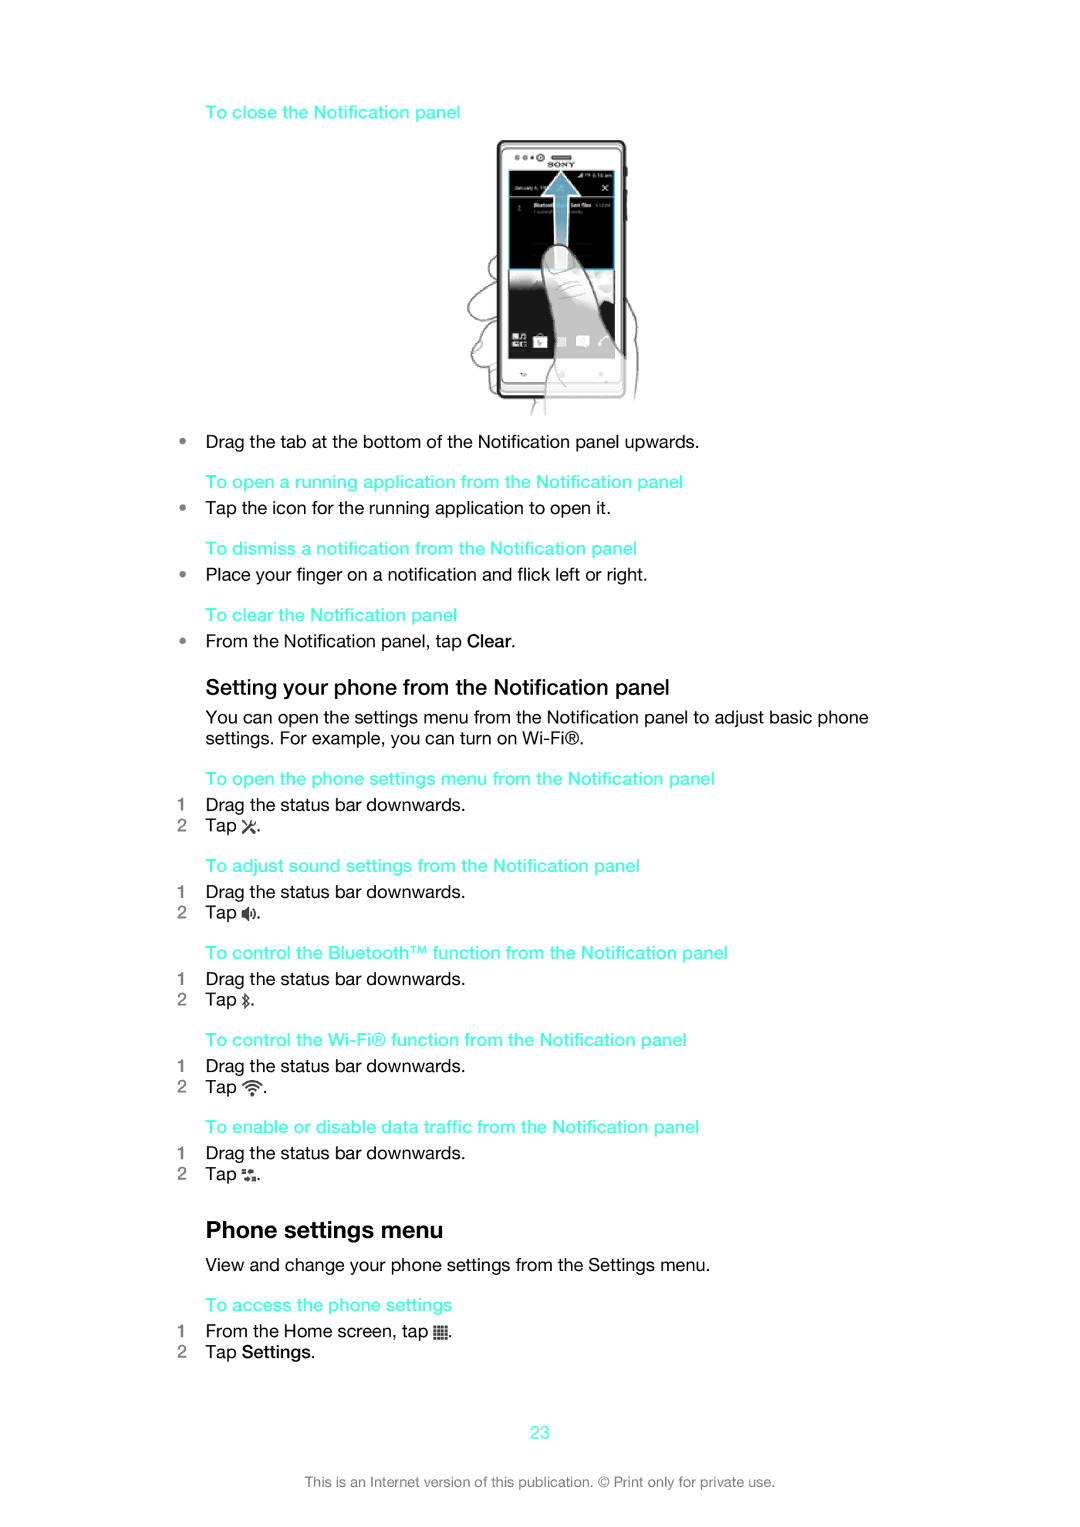 Sony ST26i/ST26a manual Phone settings menu, Setting your phone from the Notification panel 